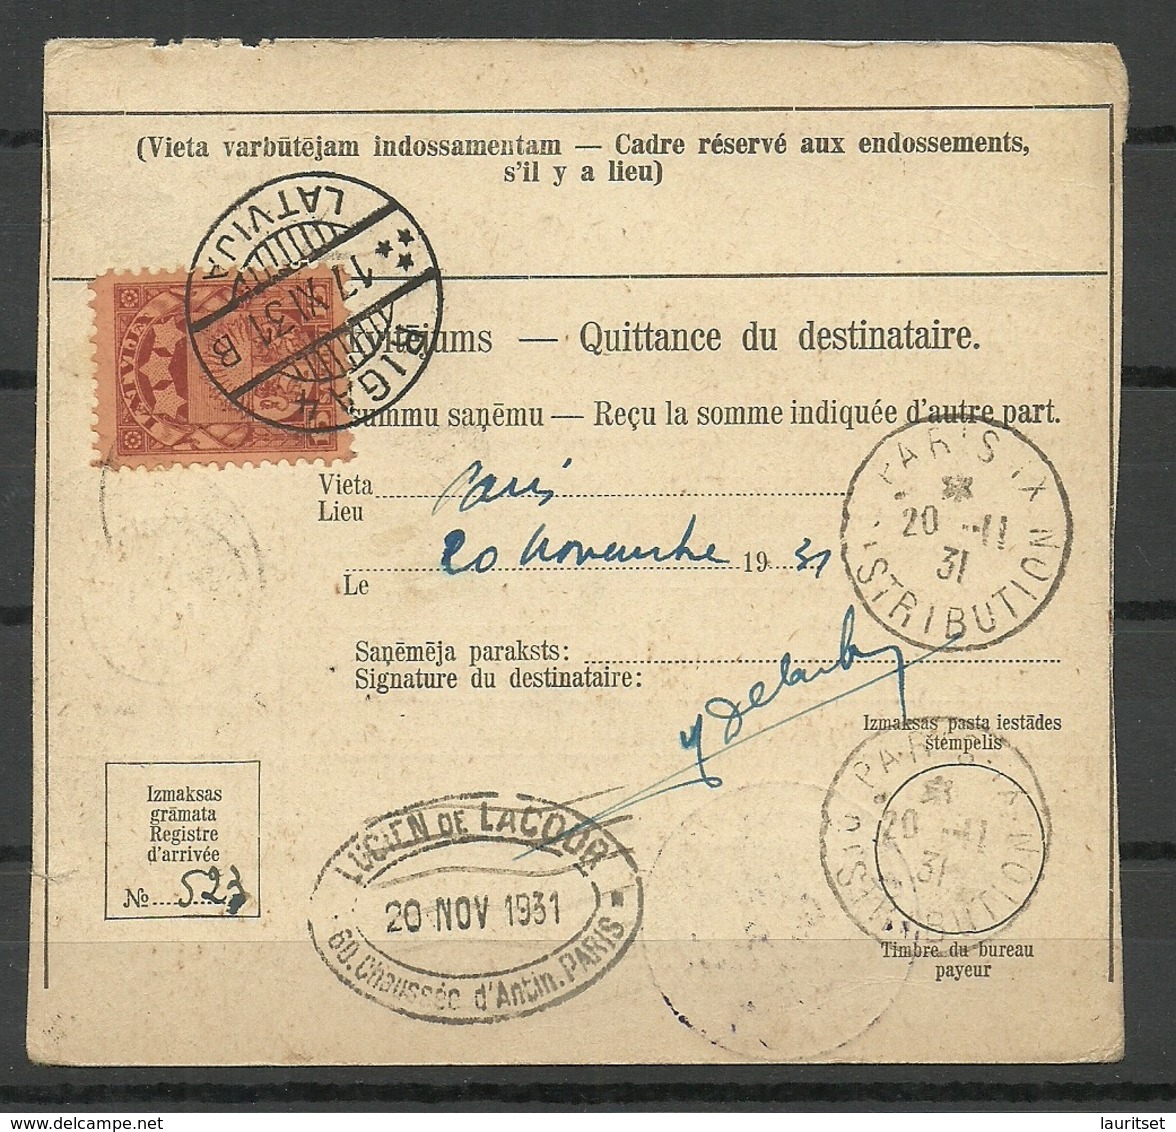 LETTLAND Latvia 1931 Postal Money Order To France With Latvia And France Stamps - Lettland